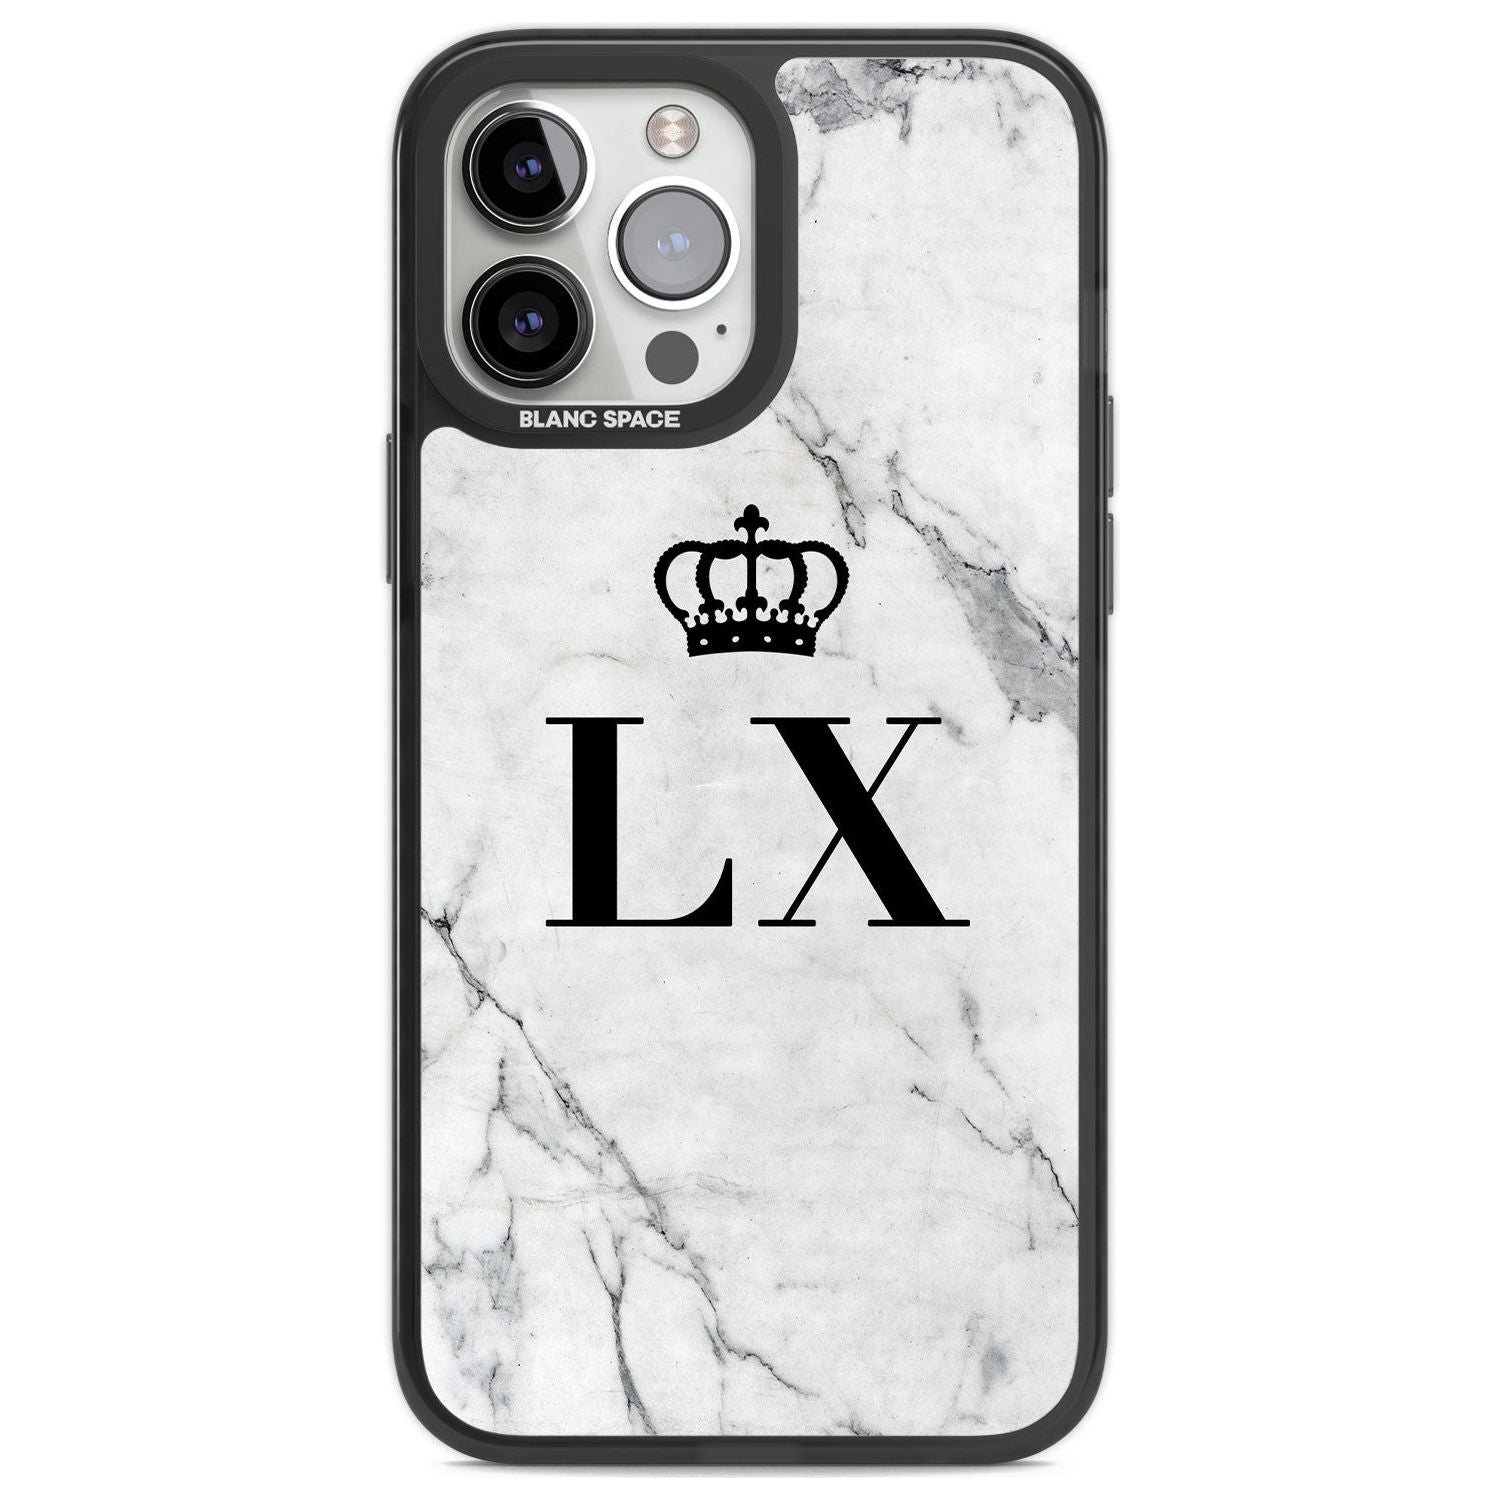 Personalised Initials with Crown on White Marble Custom Phone Case iPhone 13 Pro Max / Black Impact Case,iPhone 14 Pro Max / Black Impact Case Blanc Space